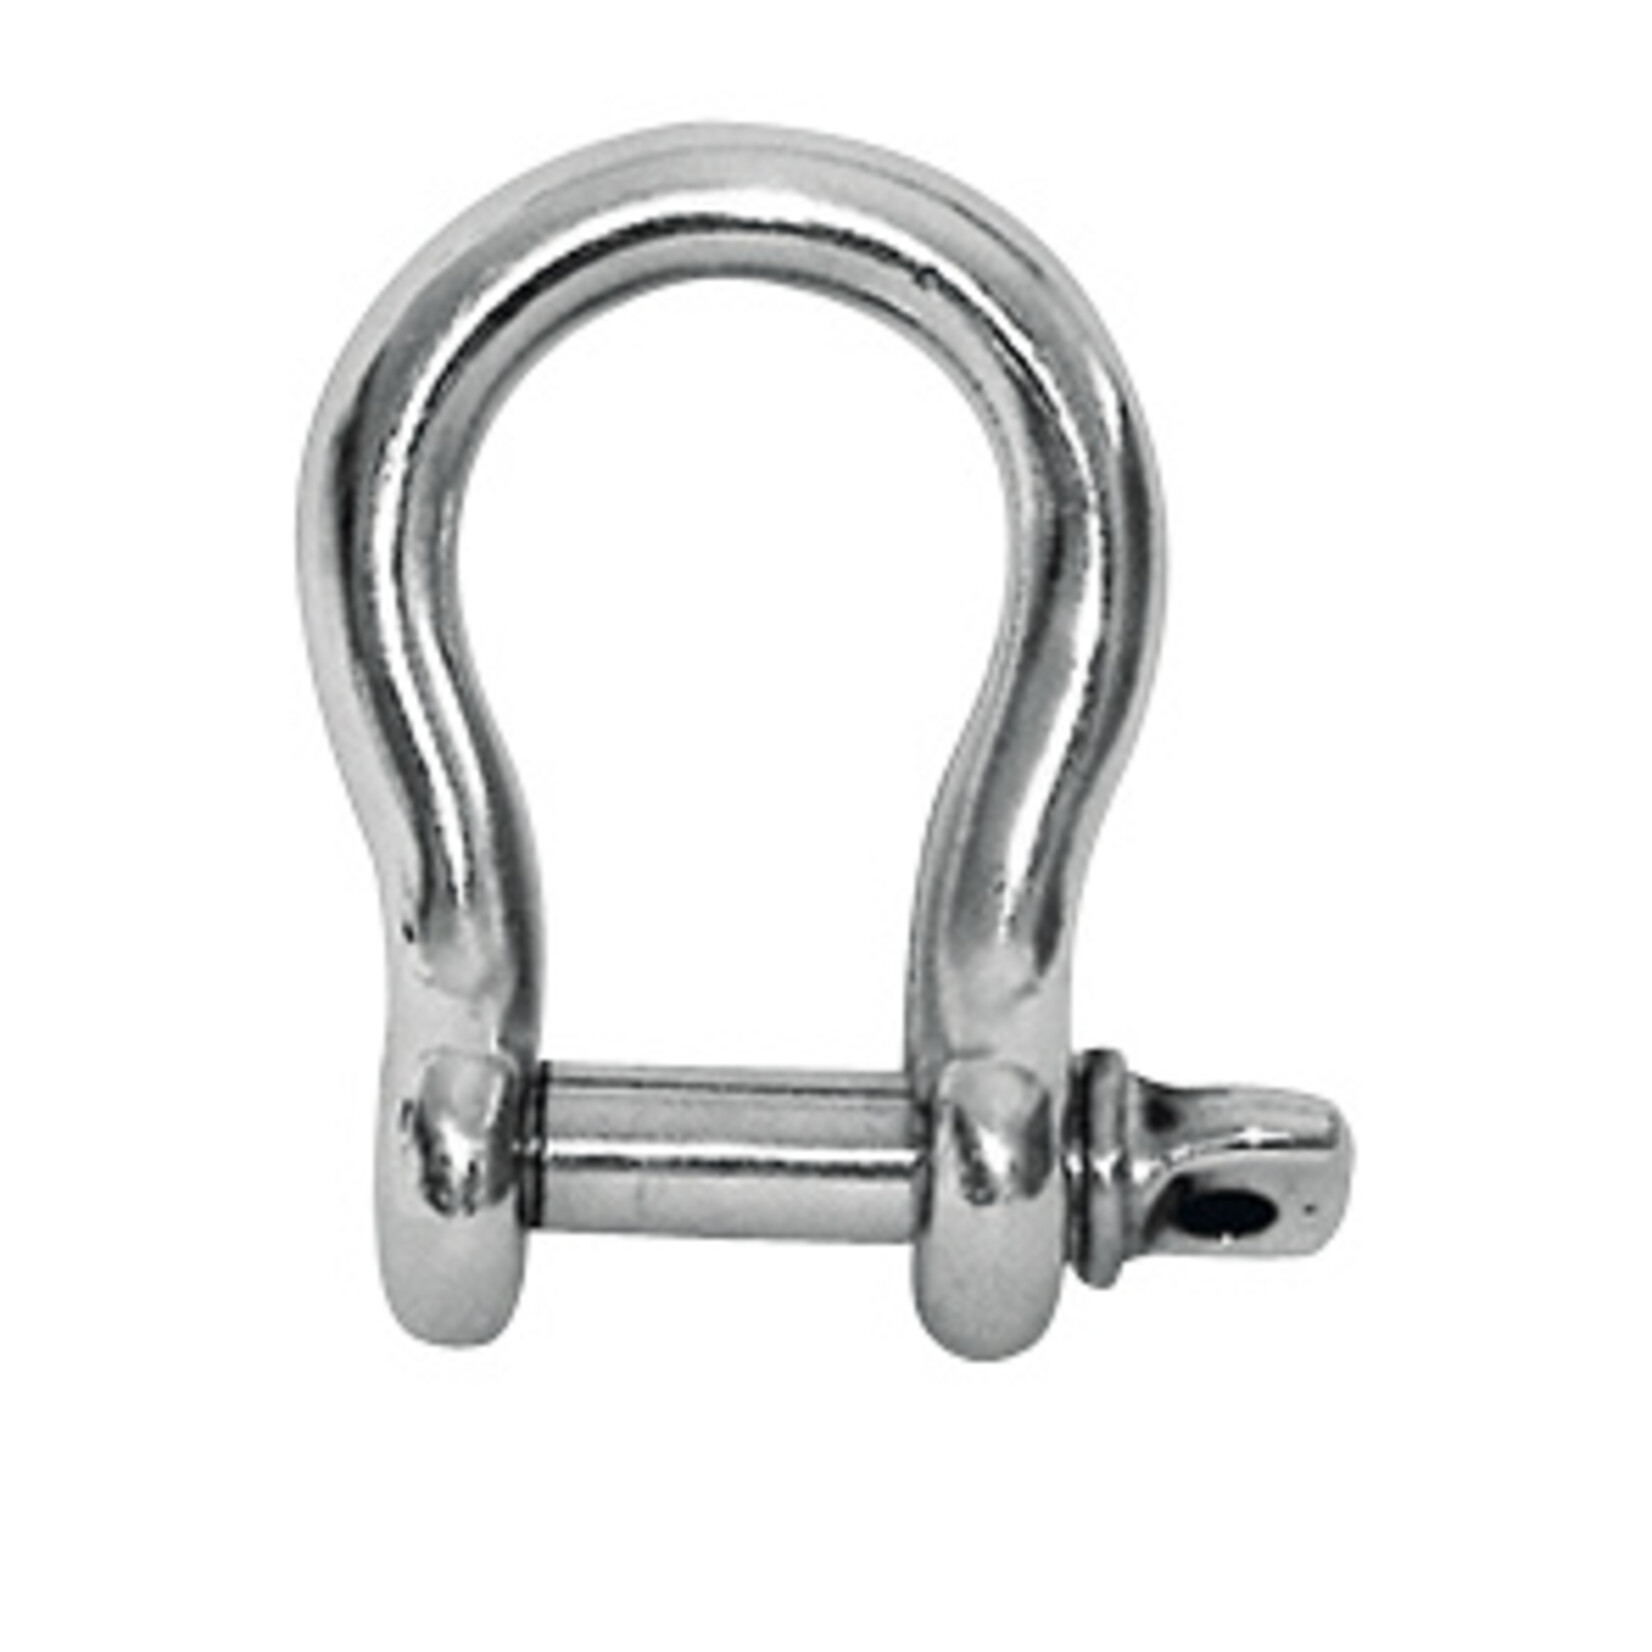 Plastimo St. bow shackle d.6mm